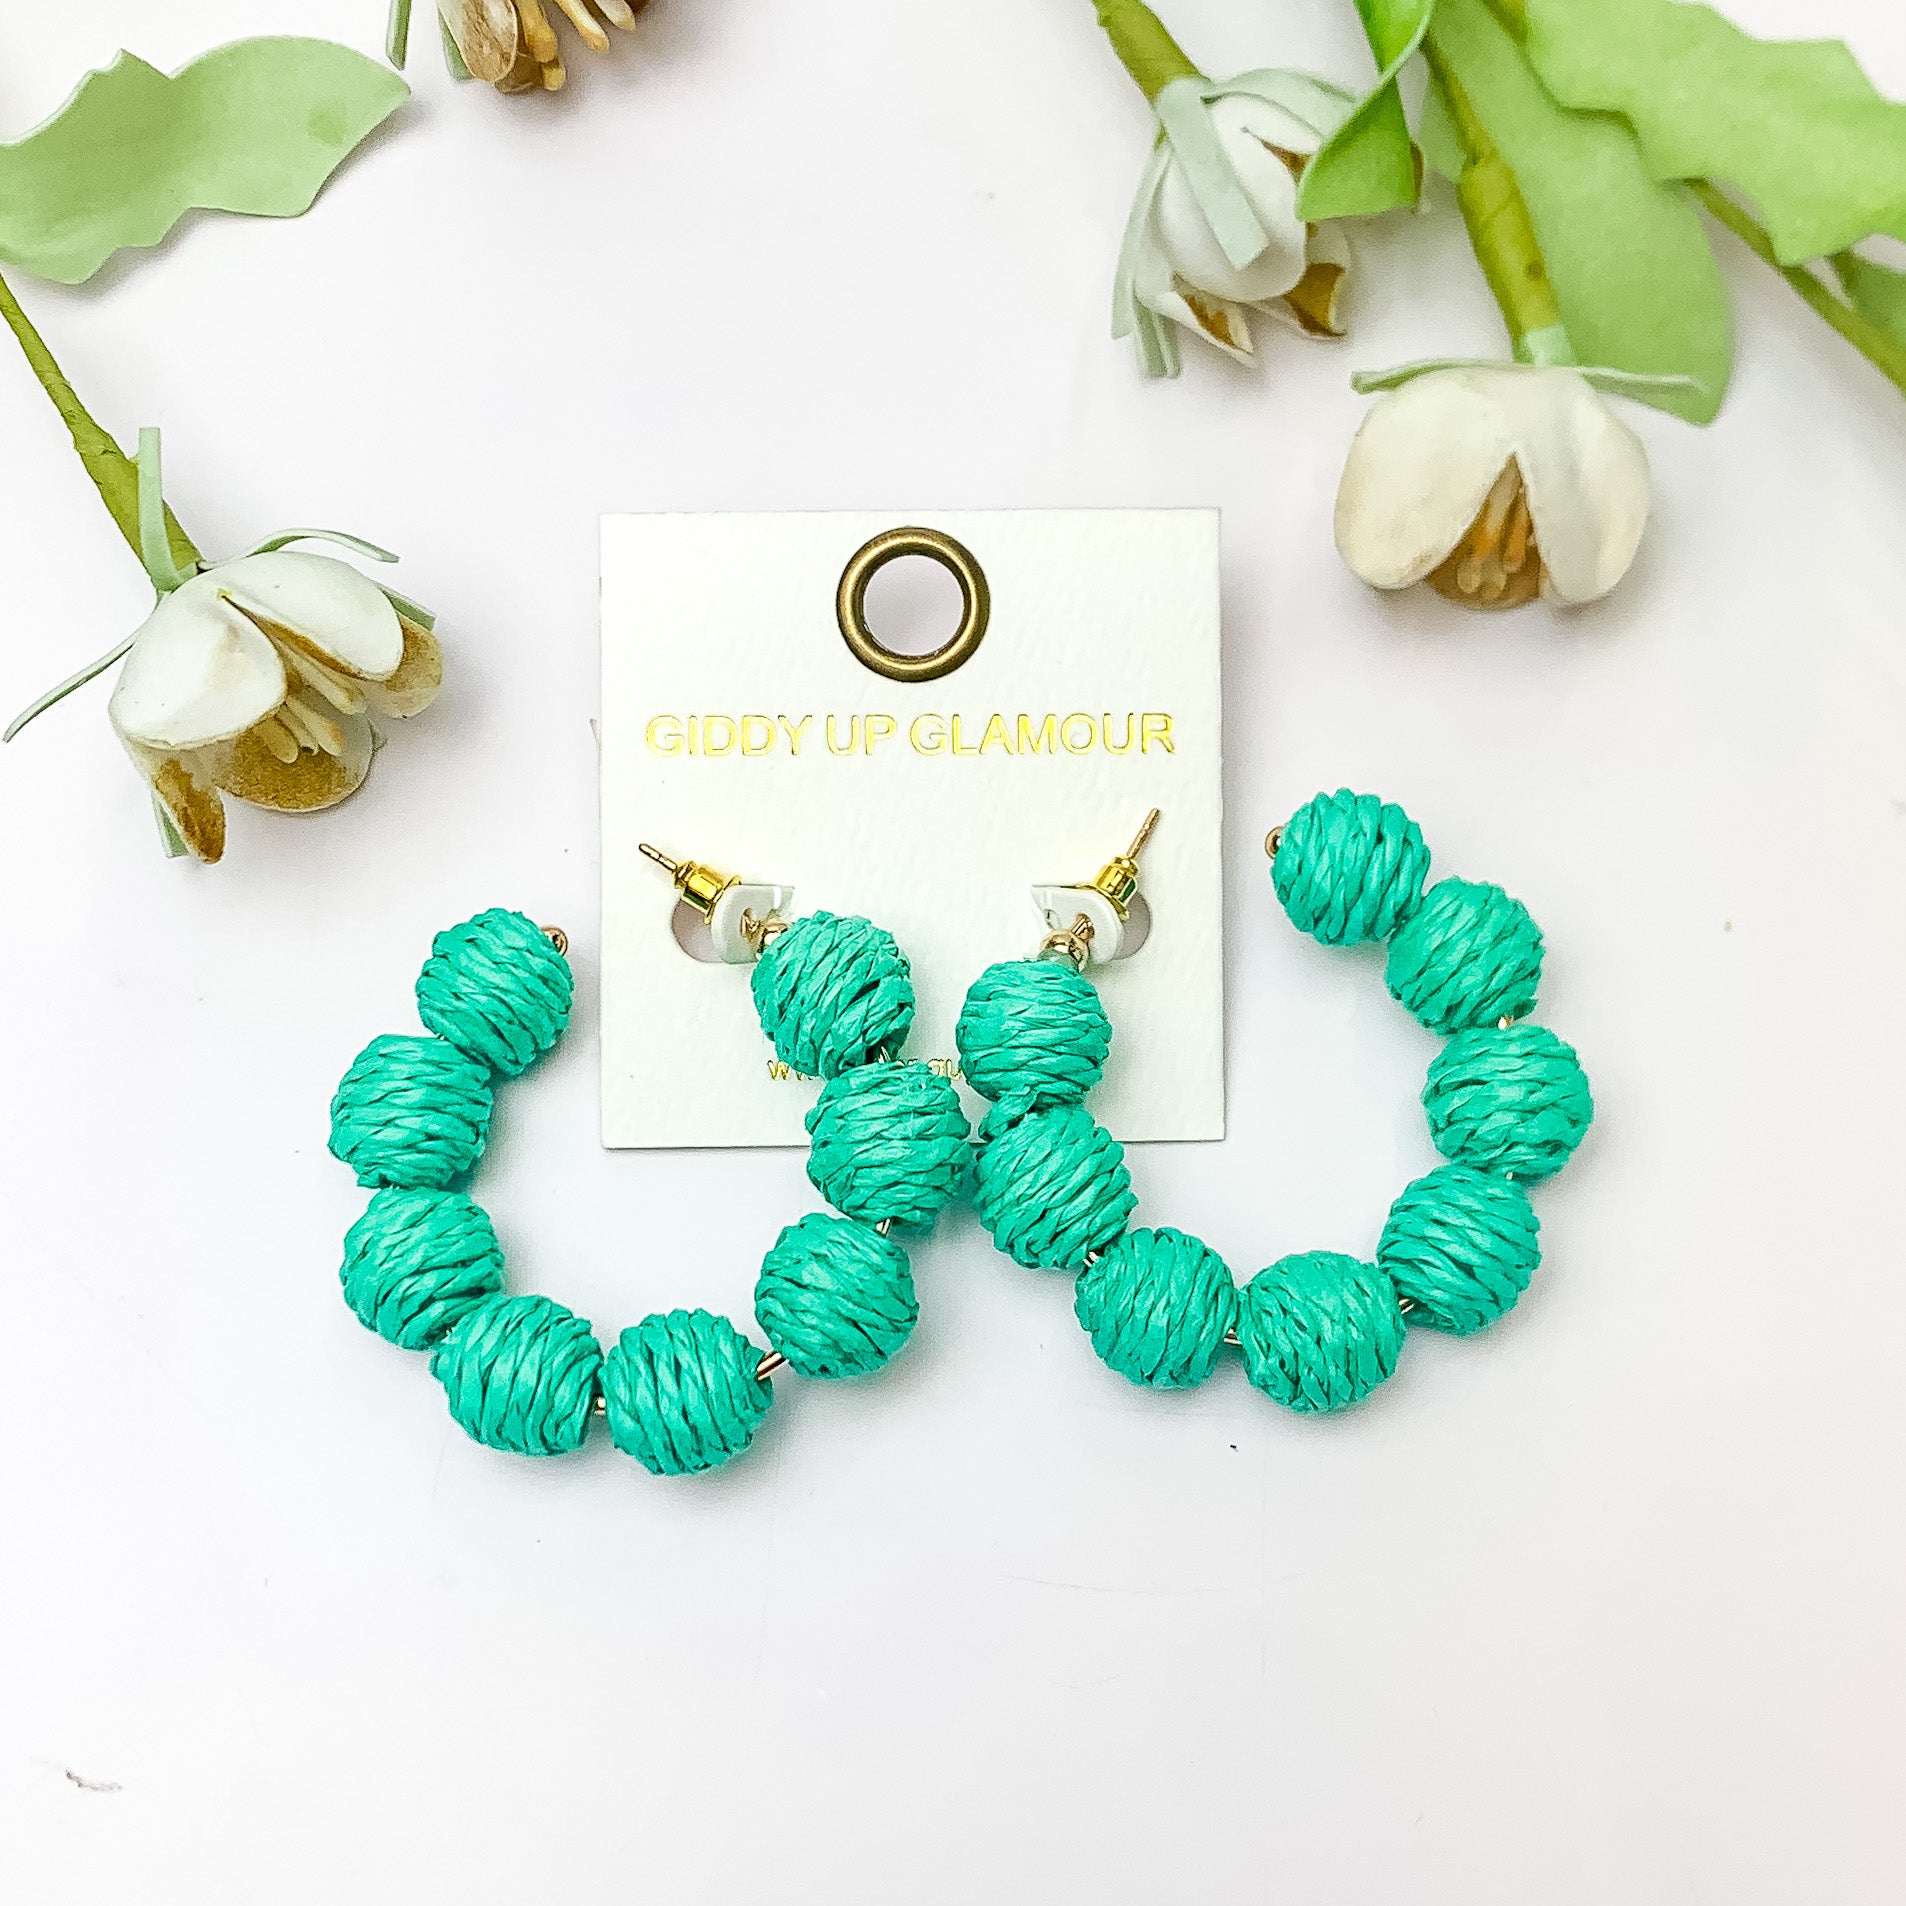 Sorbet Summer Raffia Ball Hoop Earrings in Turquoise Green. Pictured on a white background with flowers above the earrings.